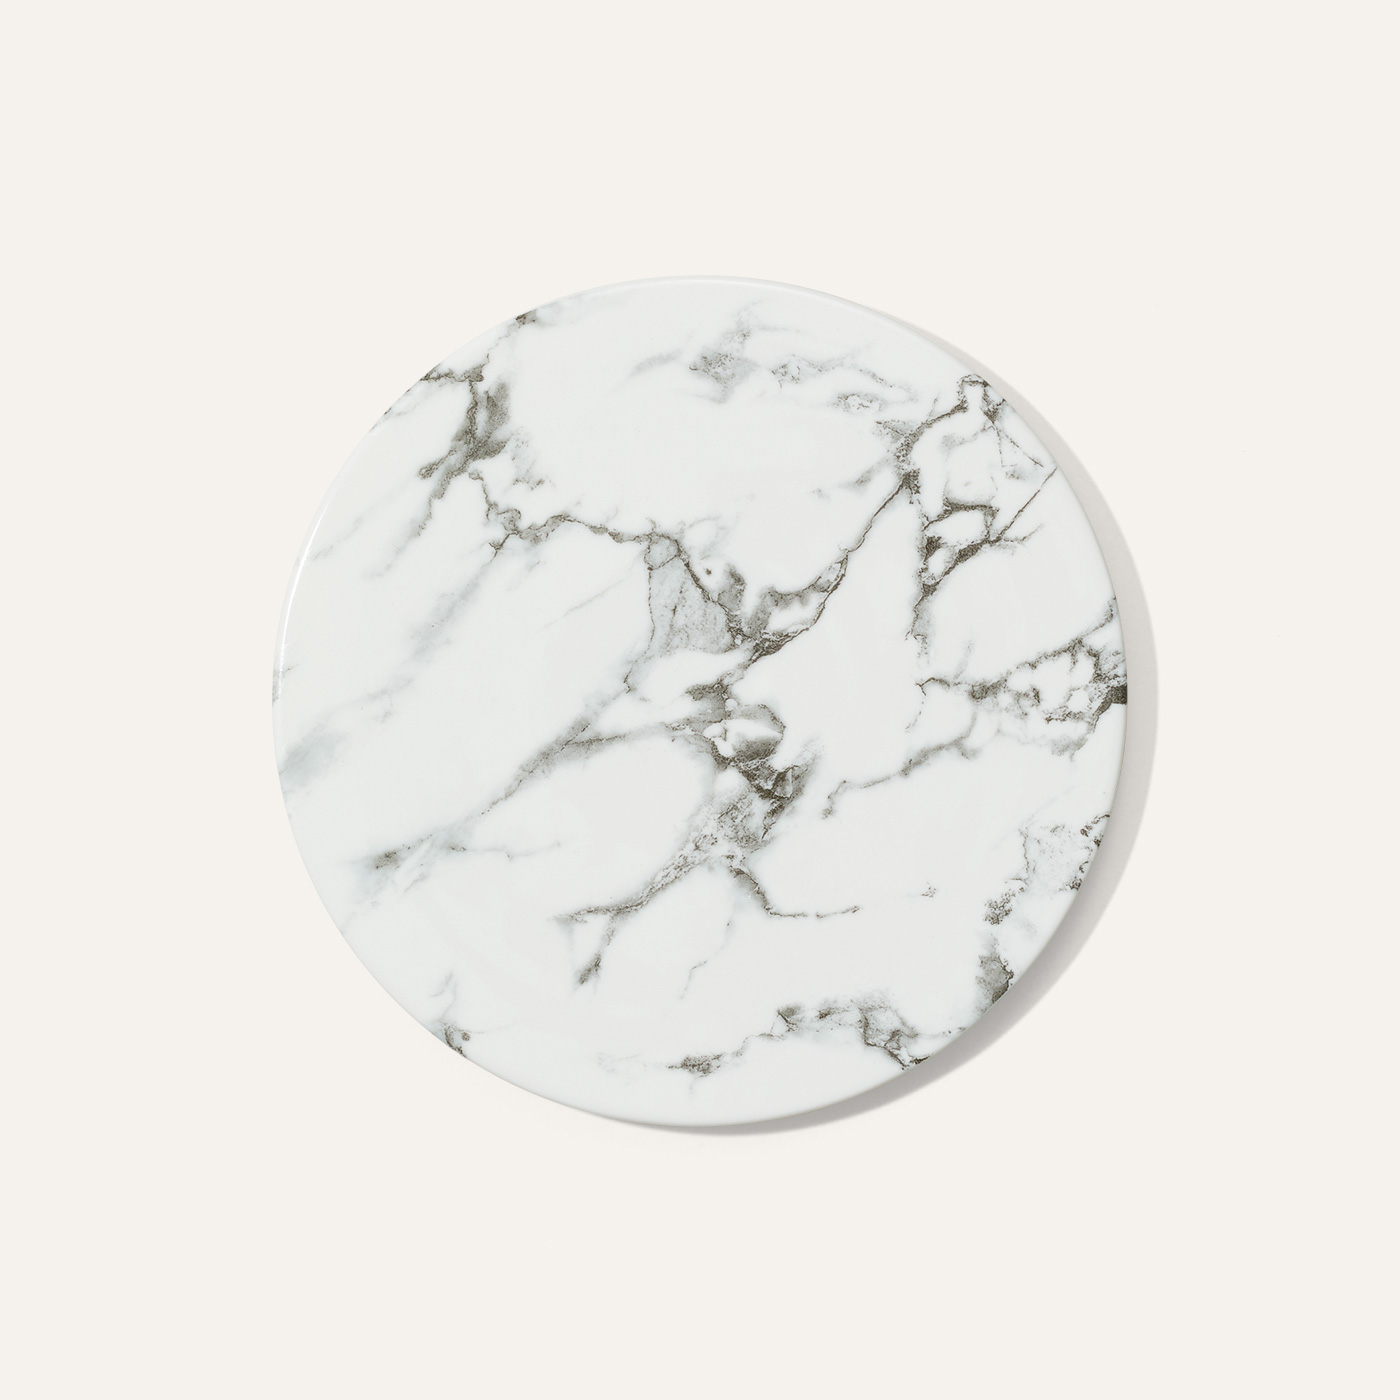 Marble style plate